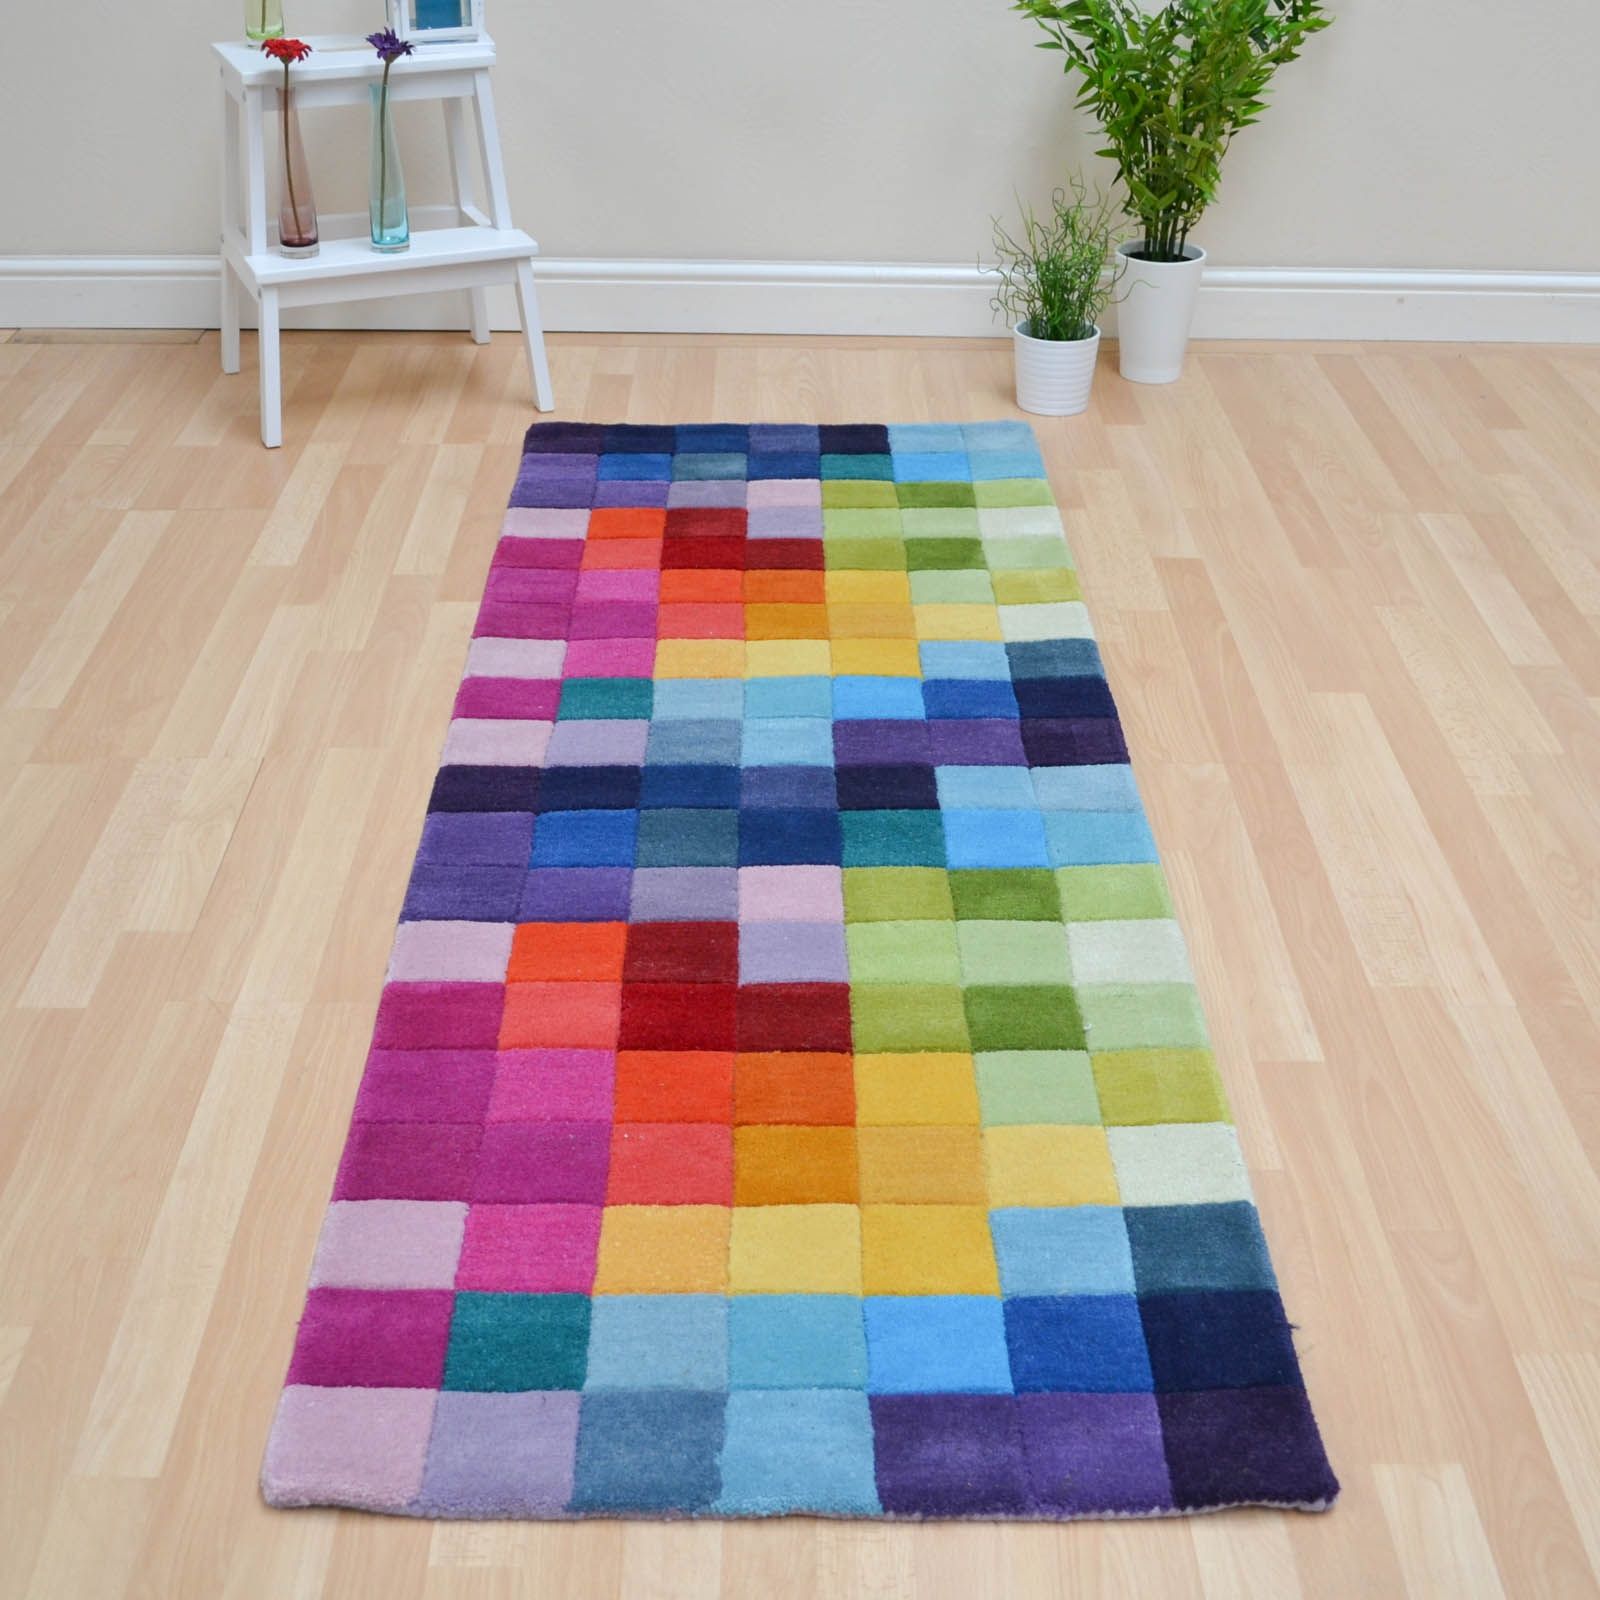 Hall Rugs Uk Roselawnlutheran In Modern Runners For Hallways (View 7 of 20)